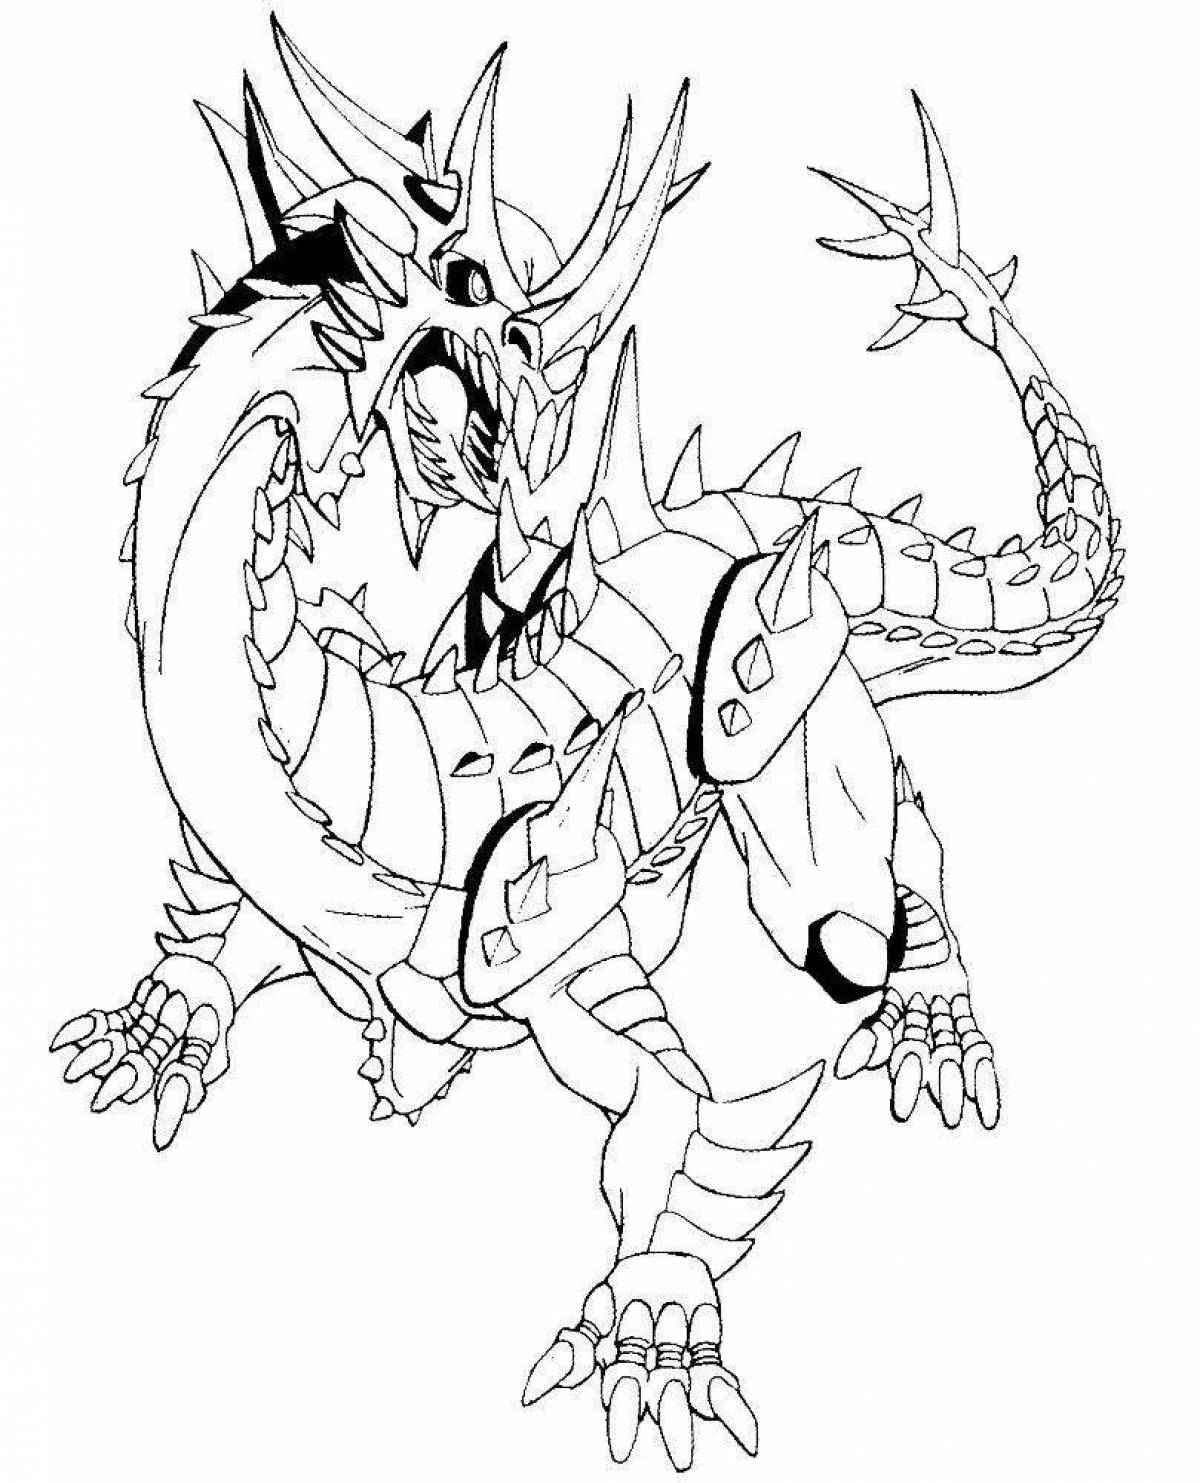 Colored bakugan coloring pages for kids